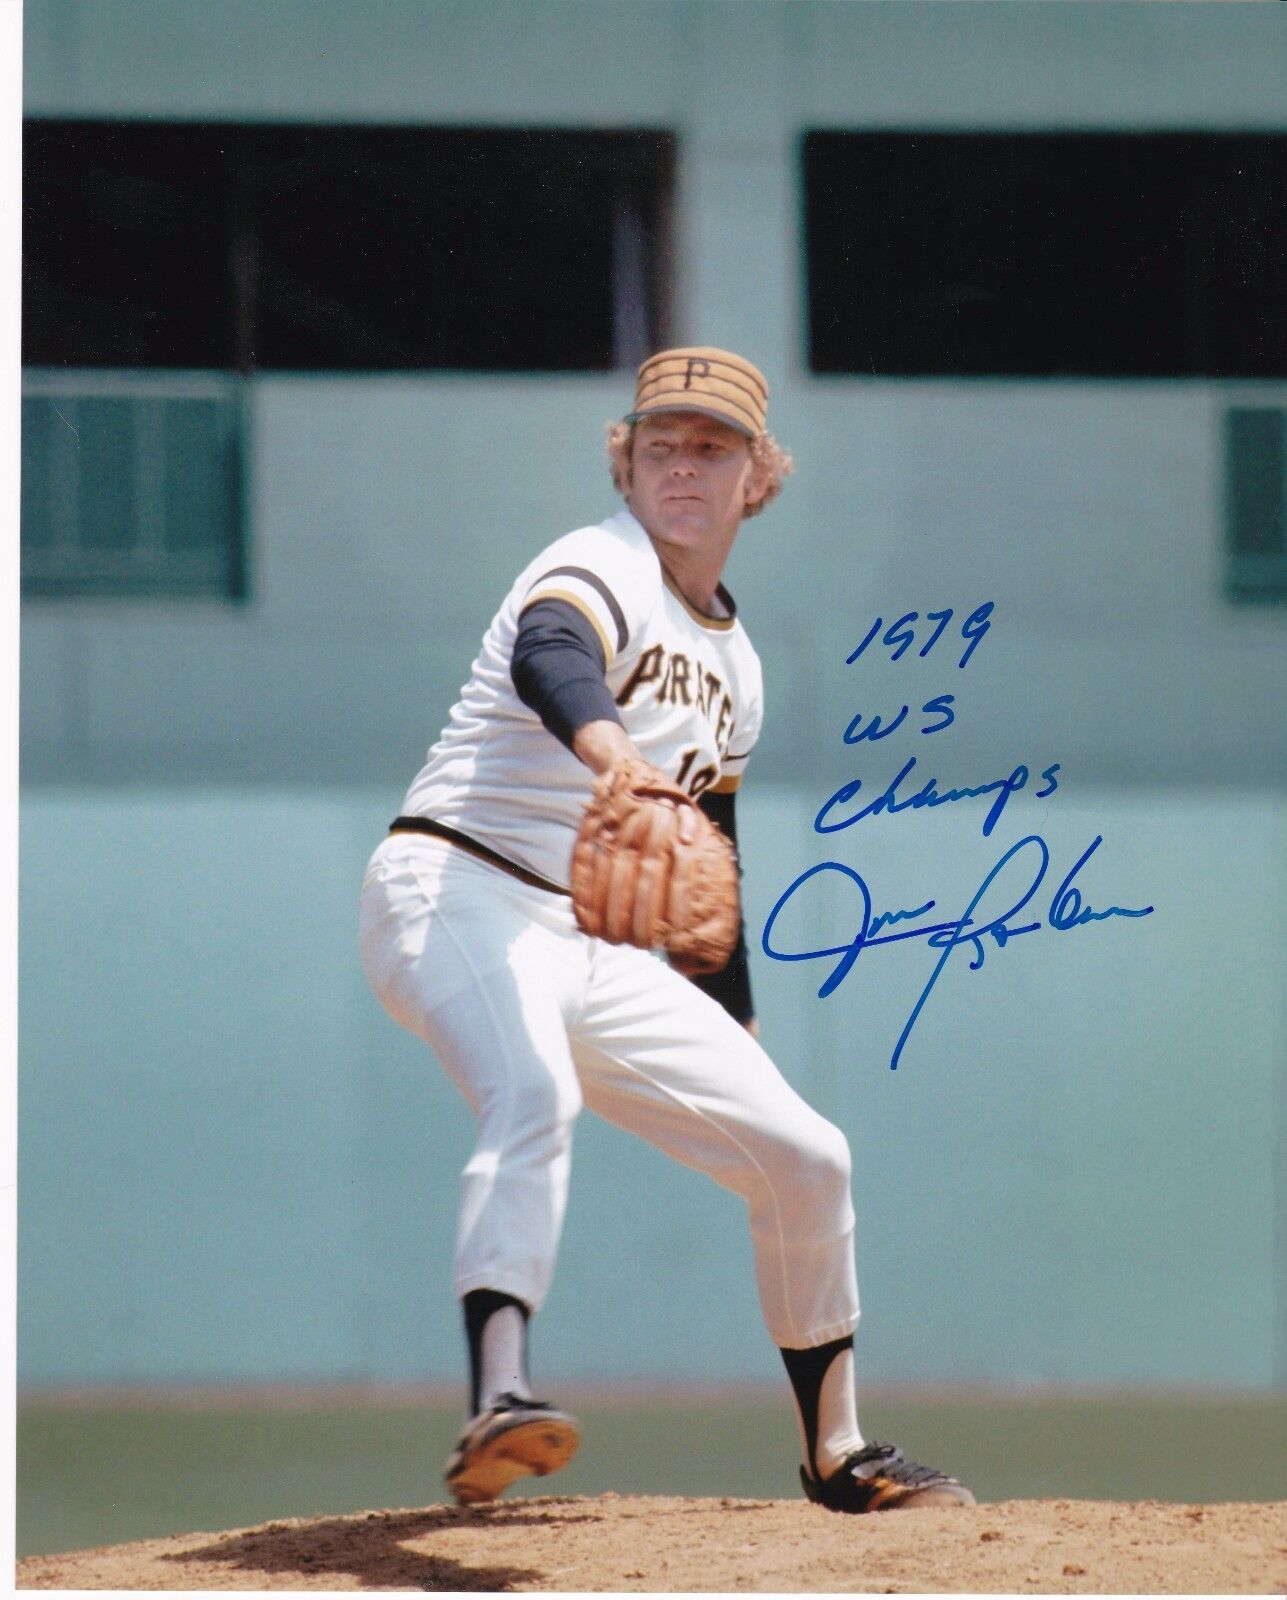 JIM ROOKER PITTSBURGH PIRATES 1979 WS CHAMPS ACTION SIGNED 8x10